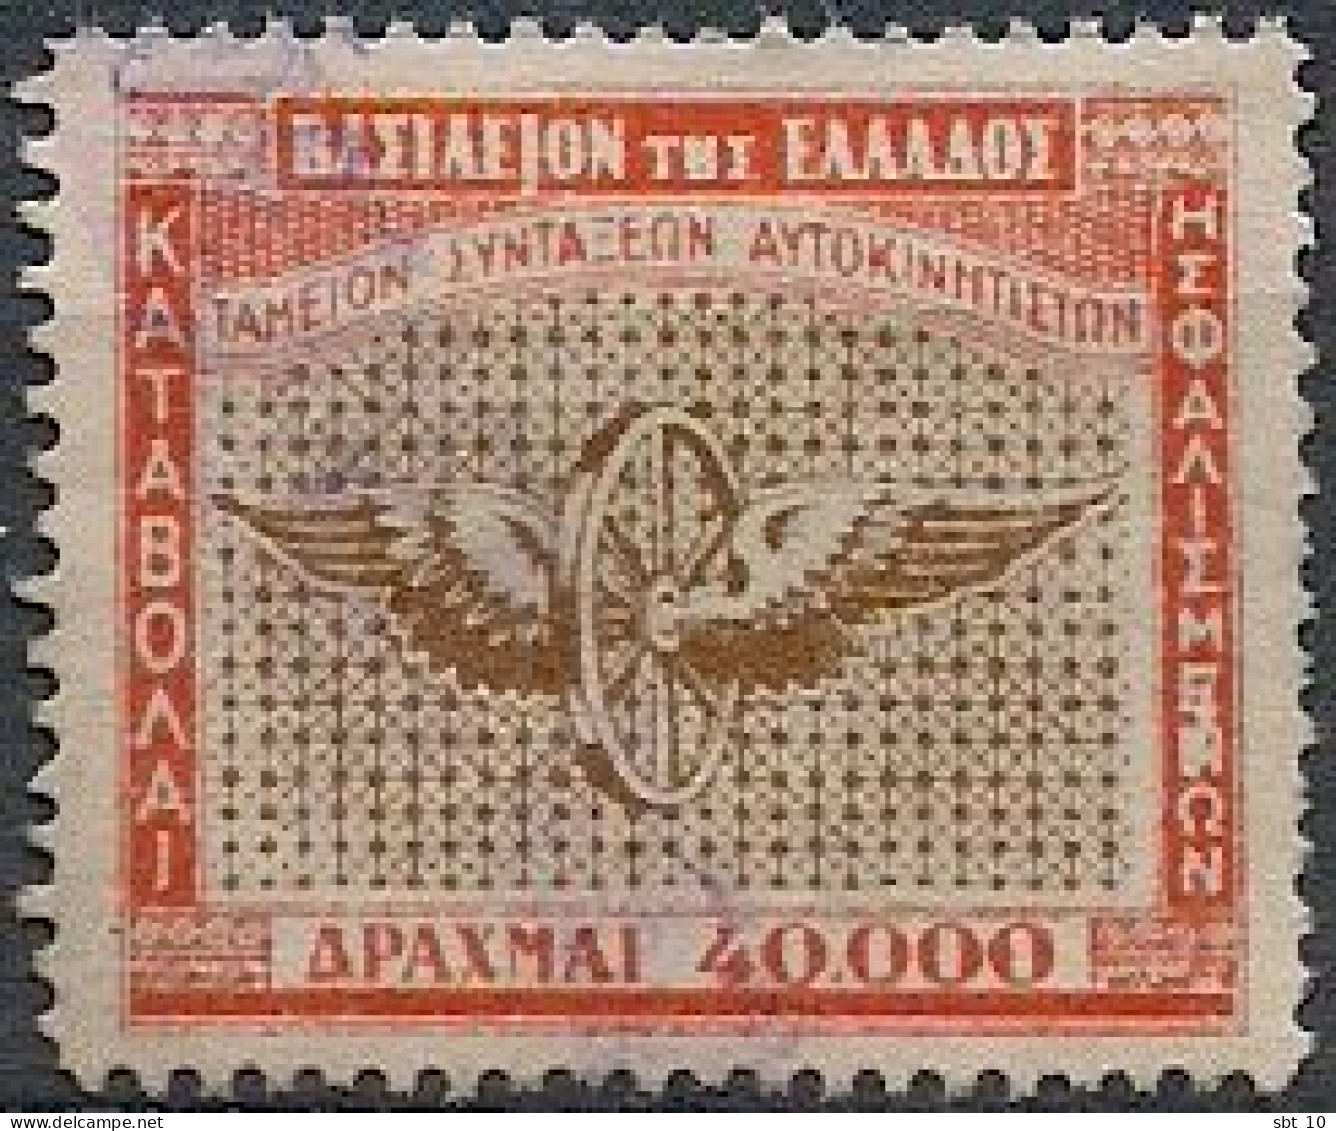 Greece - Pension Fund For Motorists 40000dr. Revenue Stamps - Used - Revenue Stamps